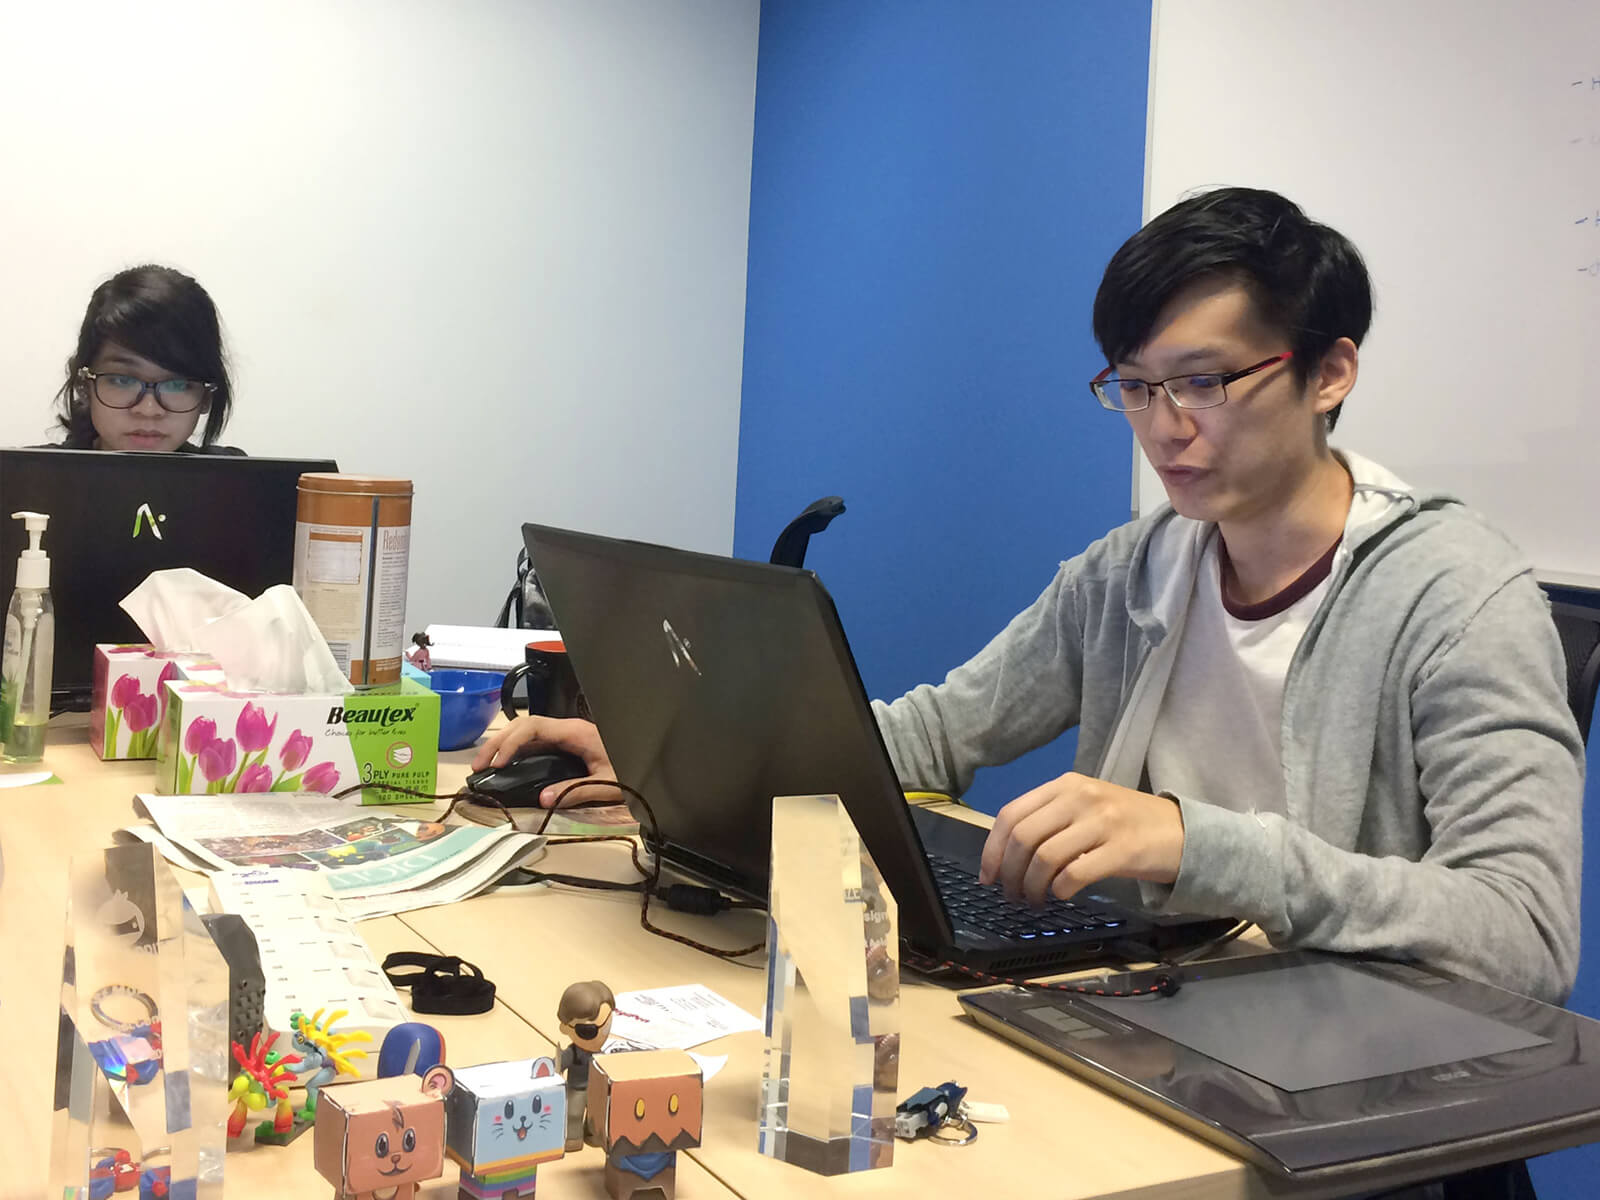 Alumnus Desmond Wong sits at a desk with a laptop computer surrounded by trinkets and awards